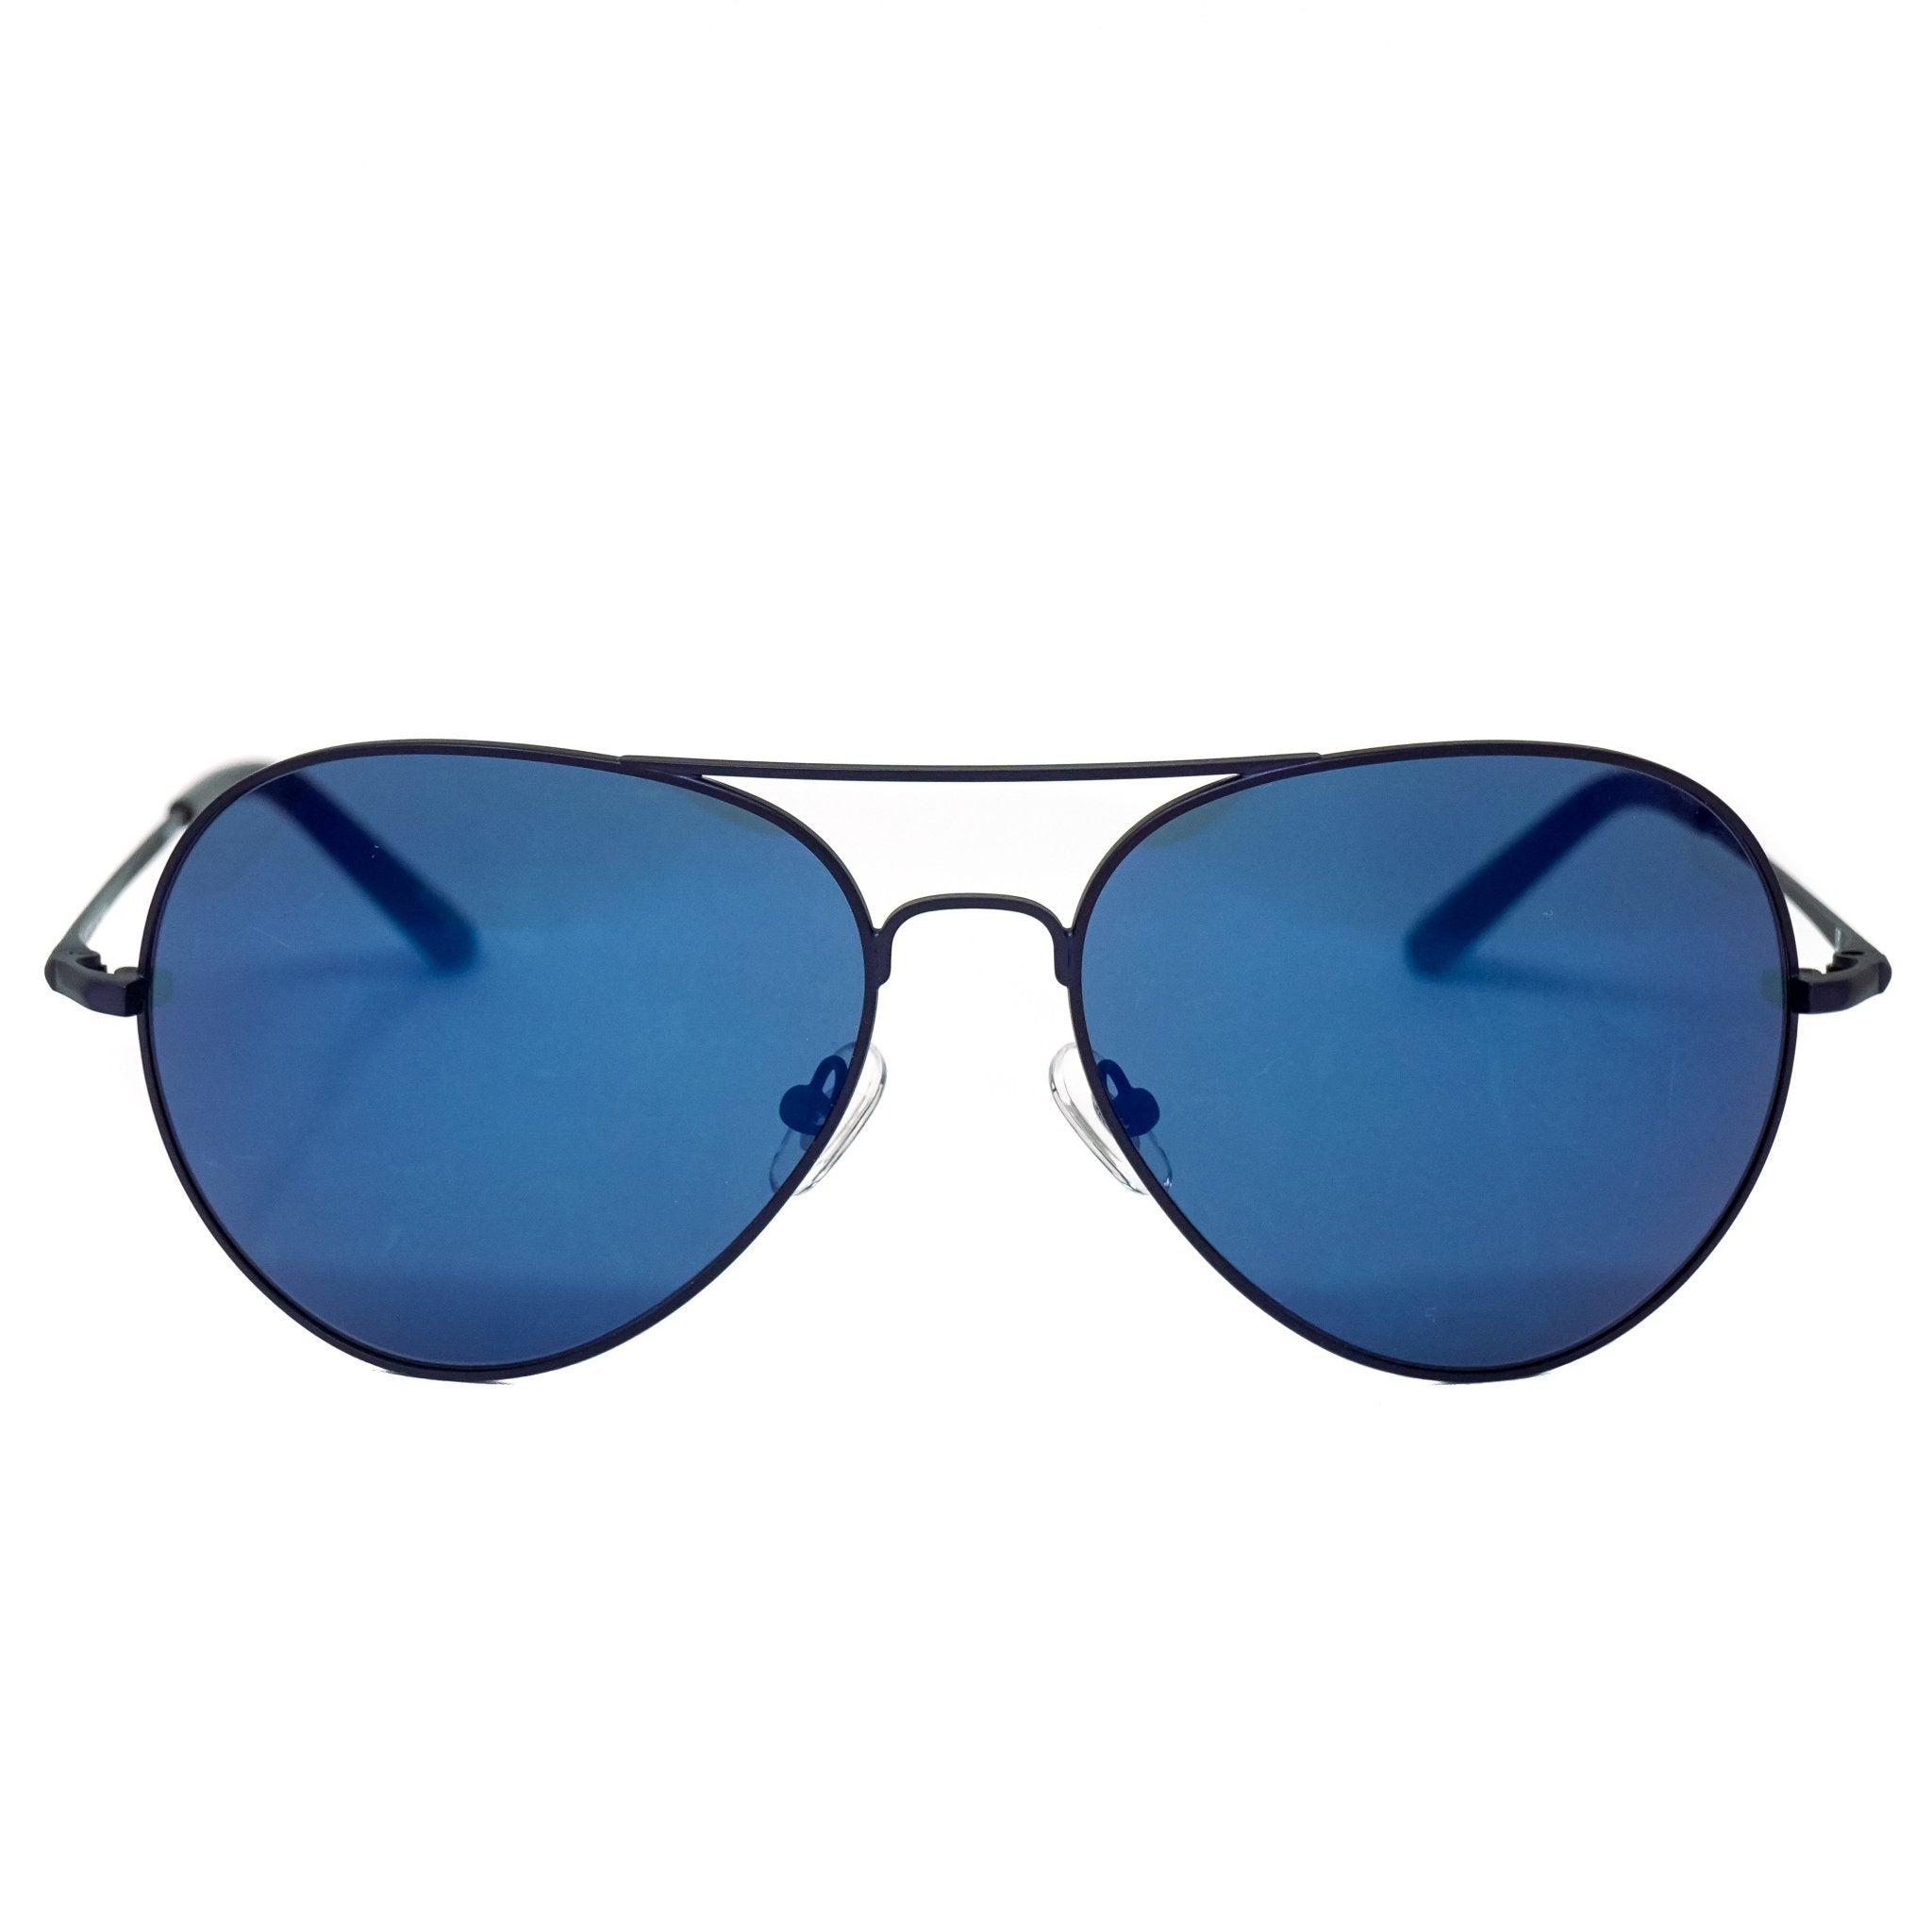 Matthew Williamson Sunglasses Black and Blue - Watches & Crystals